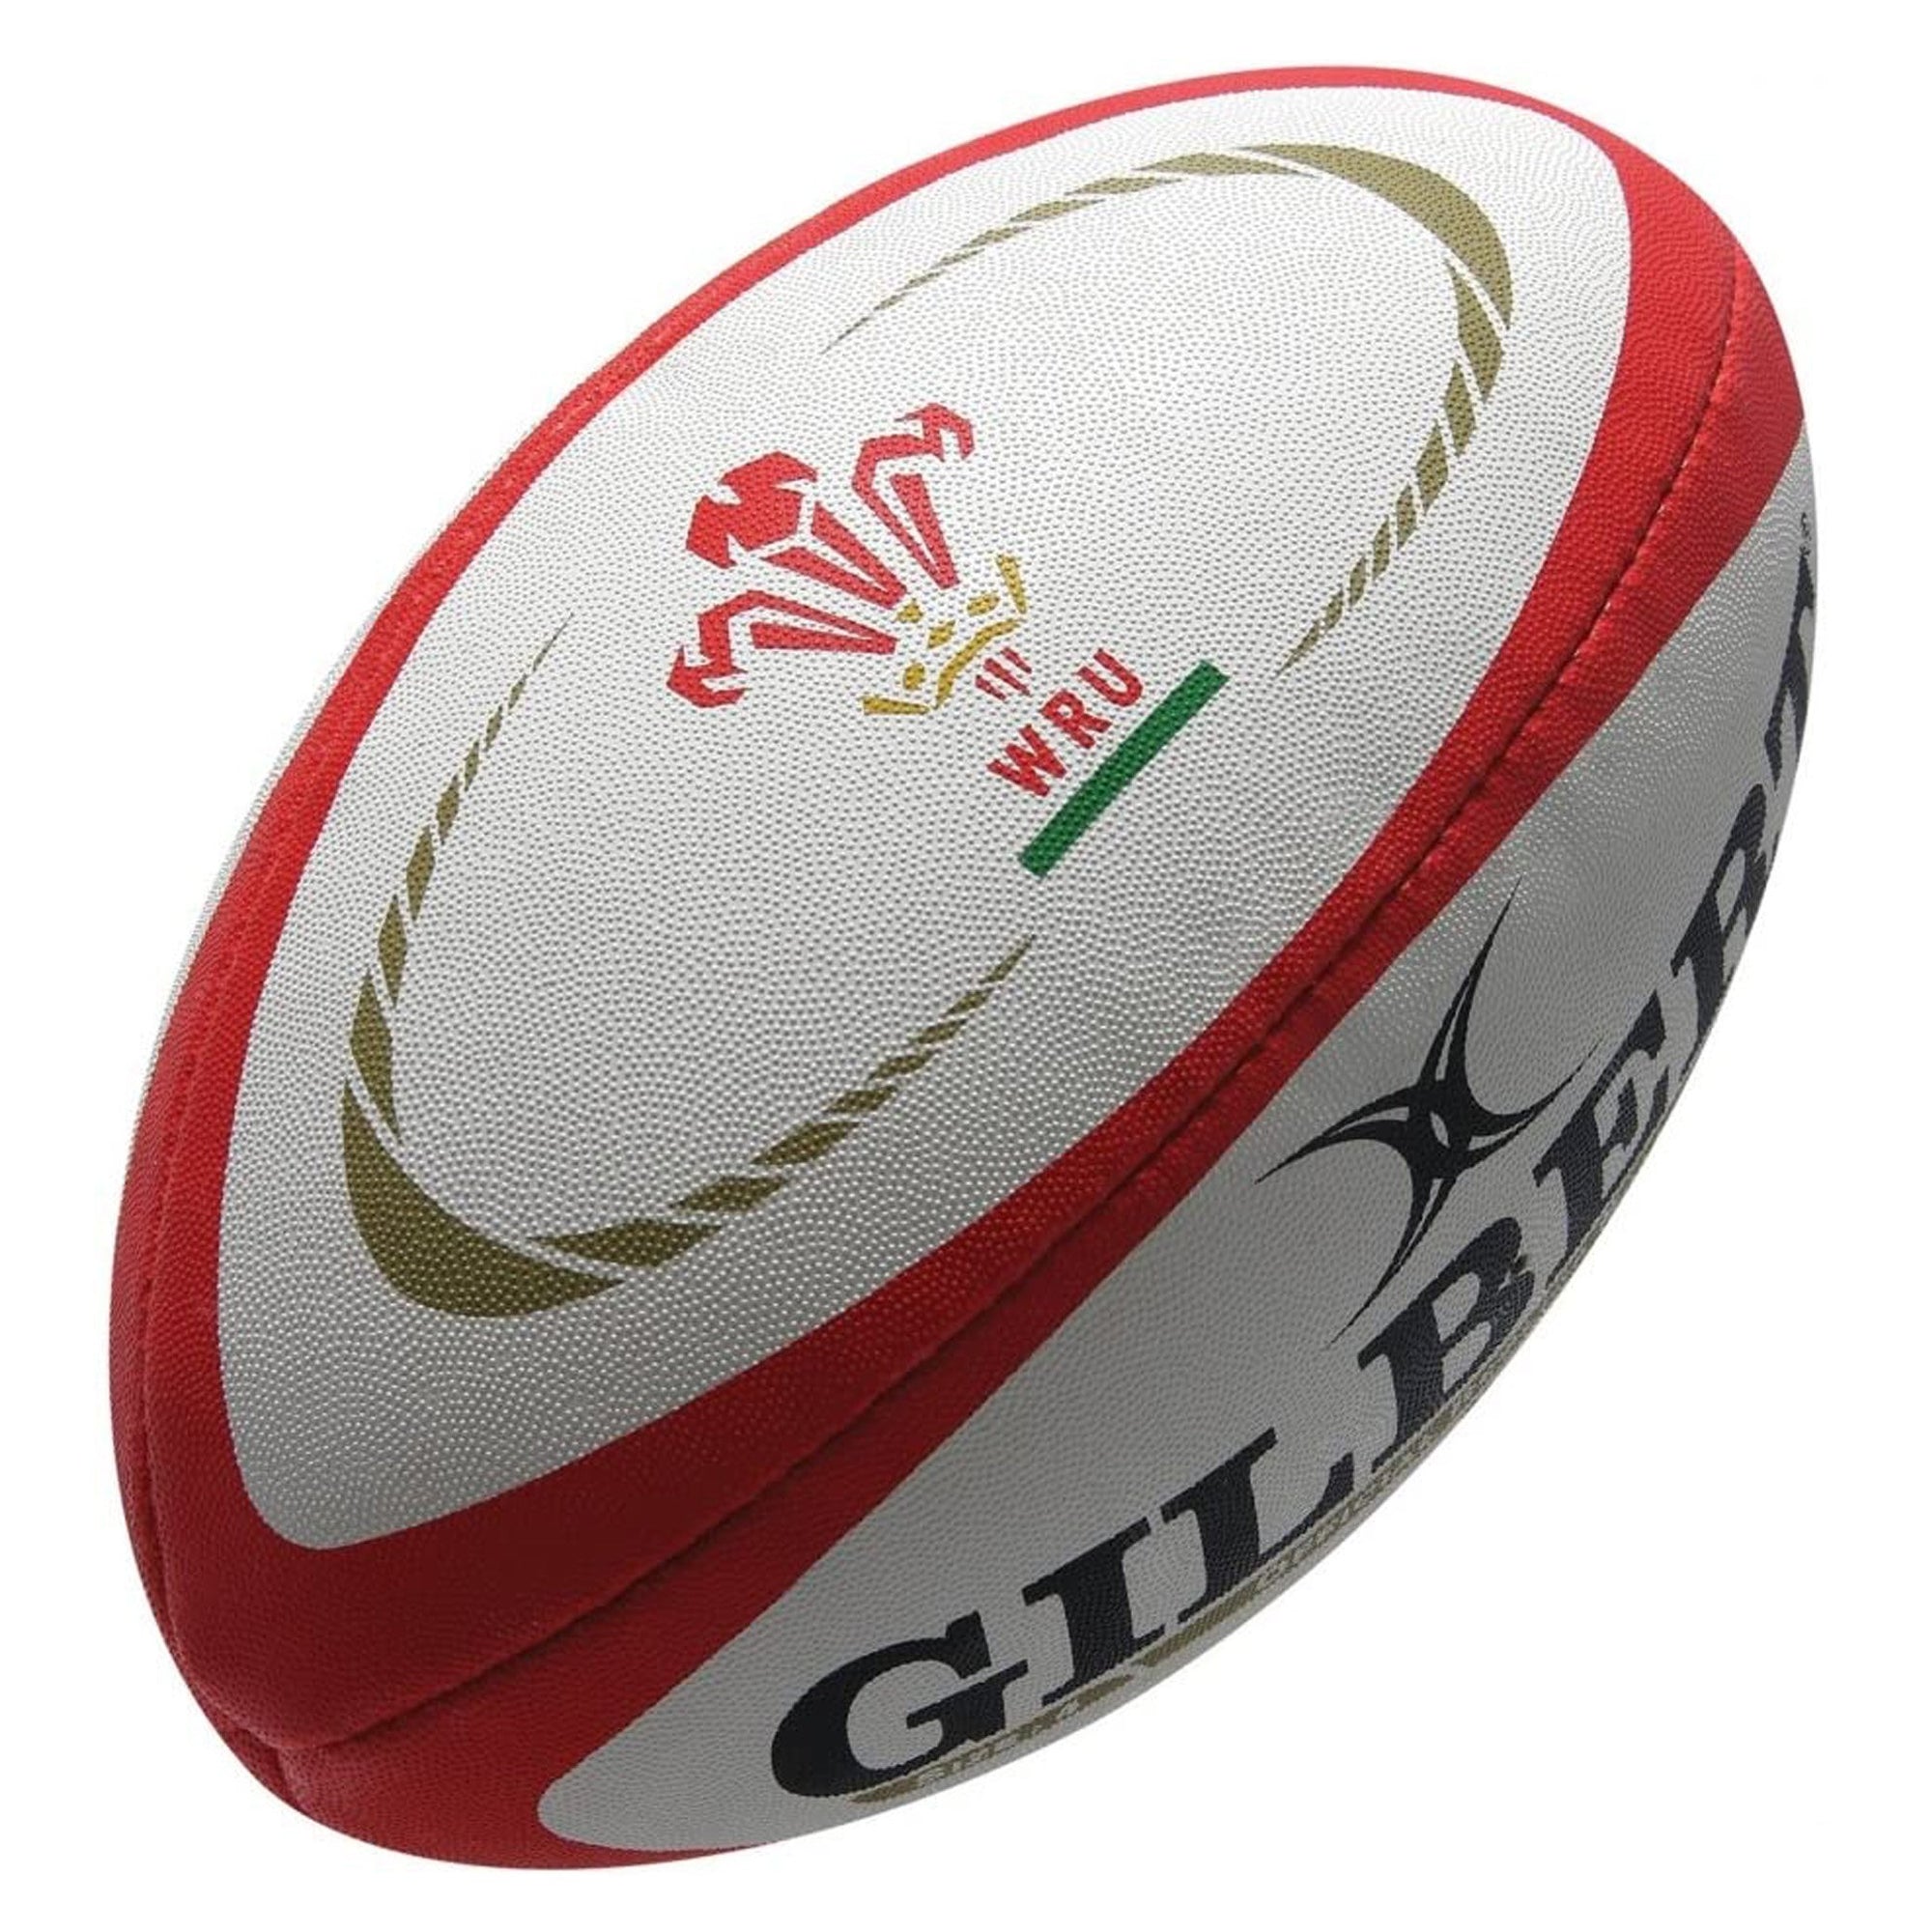 Rugby Imports Gilbert Wales Rugby Replica Ball